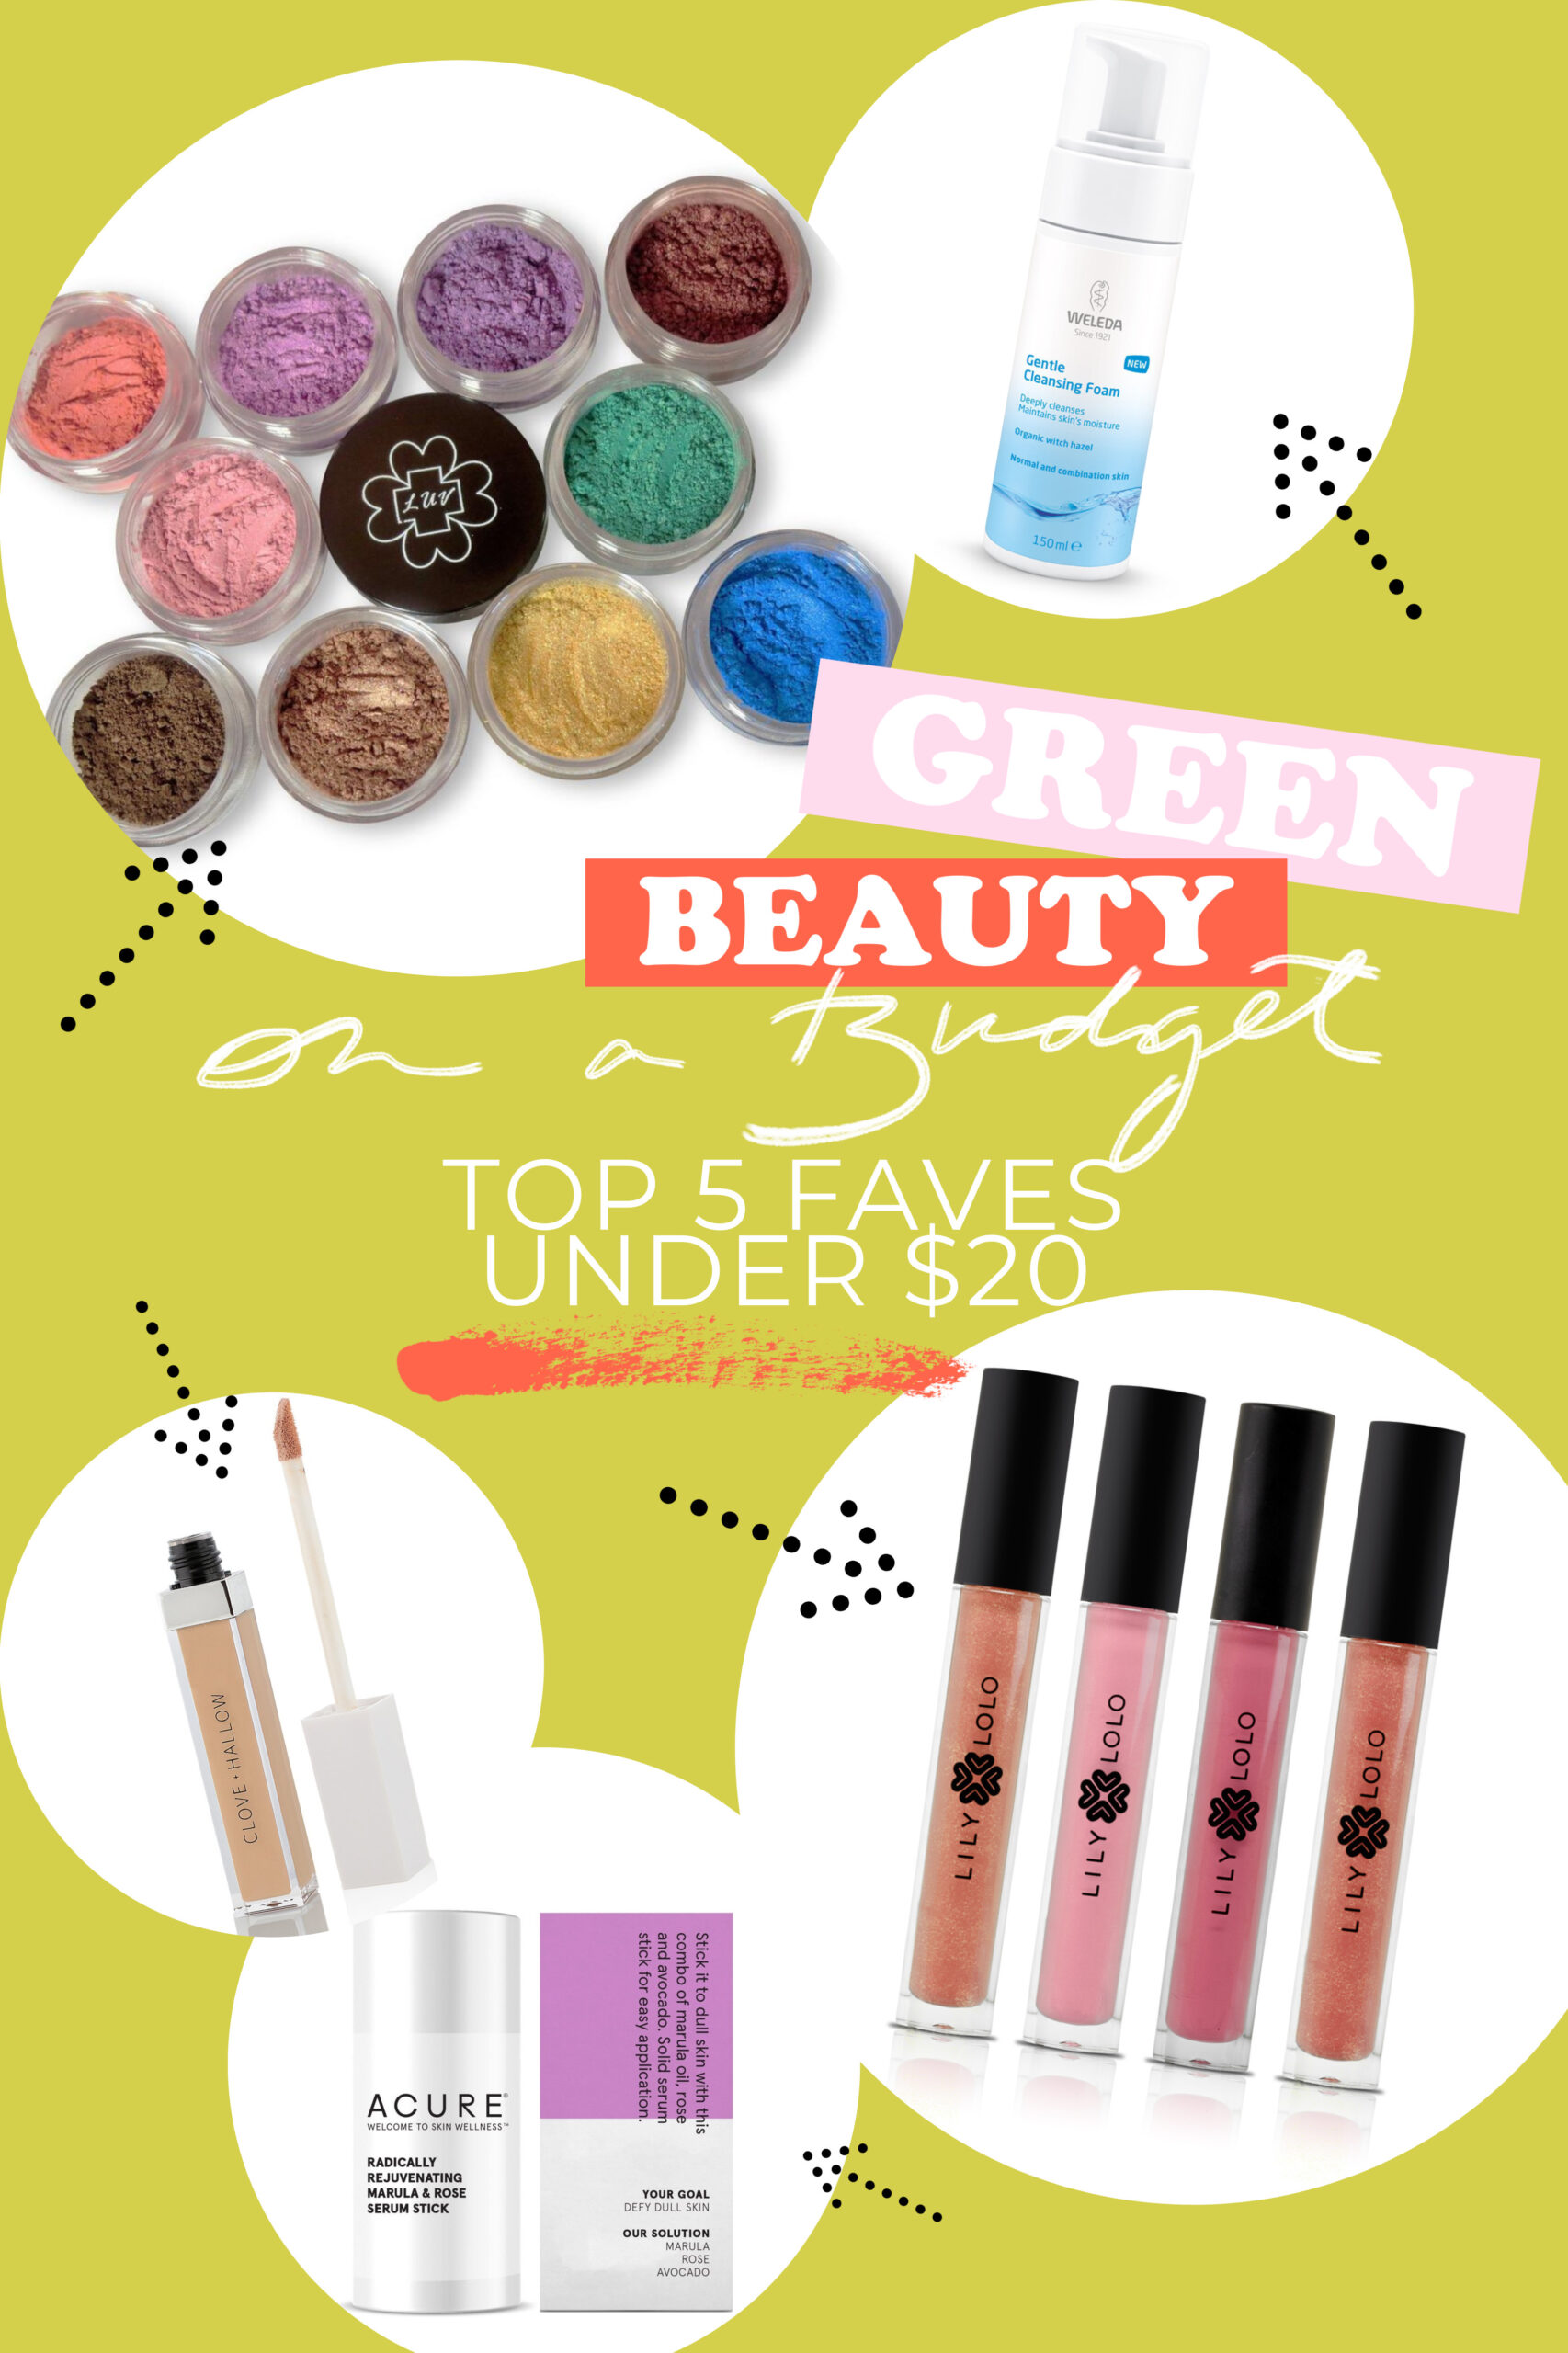 Green Beauty on a Budget: Top 5 Faves Under $20